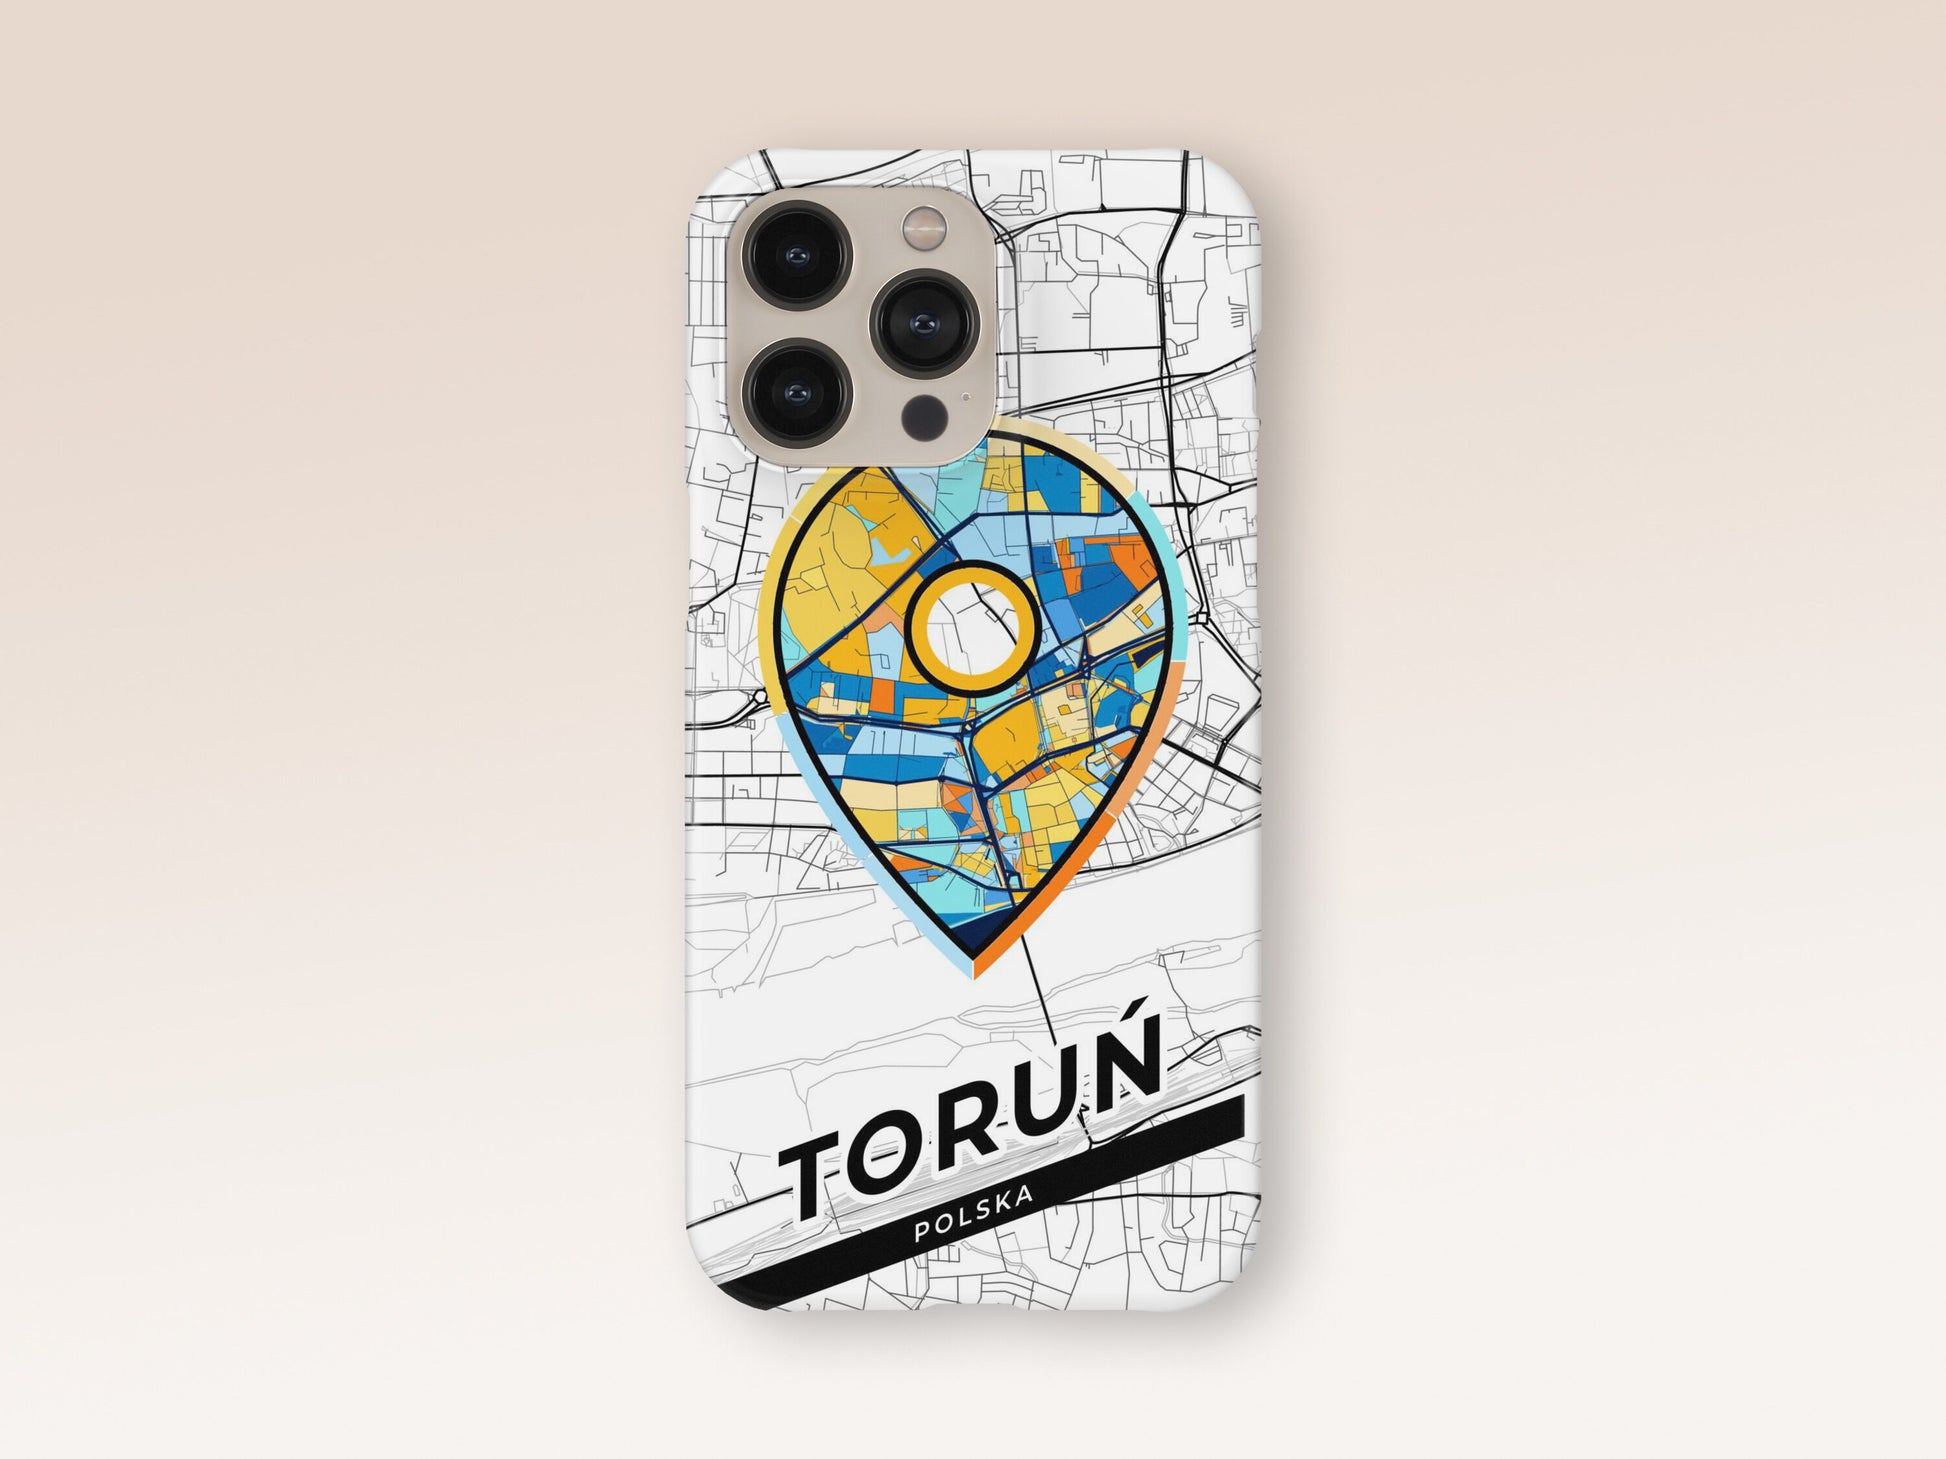 Toruń Poland slim phone case with colorful icon 1